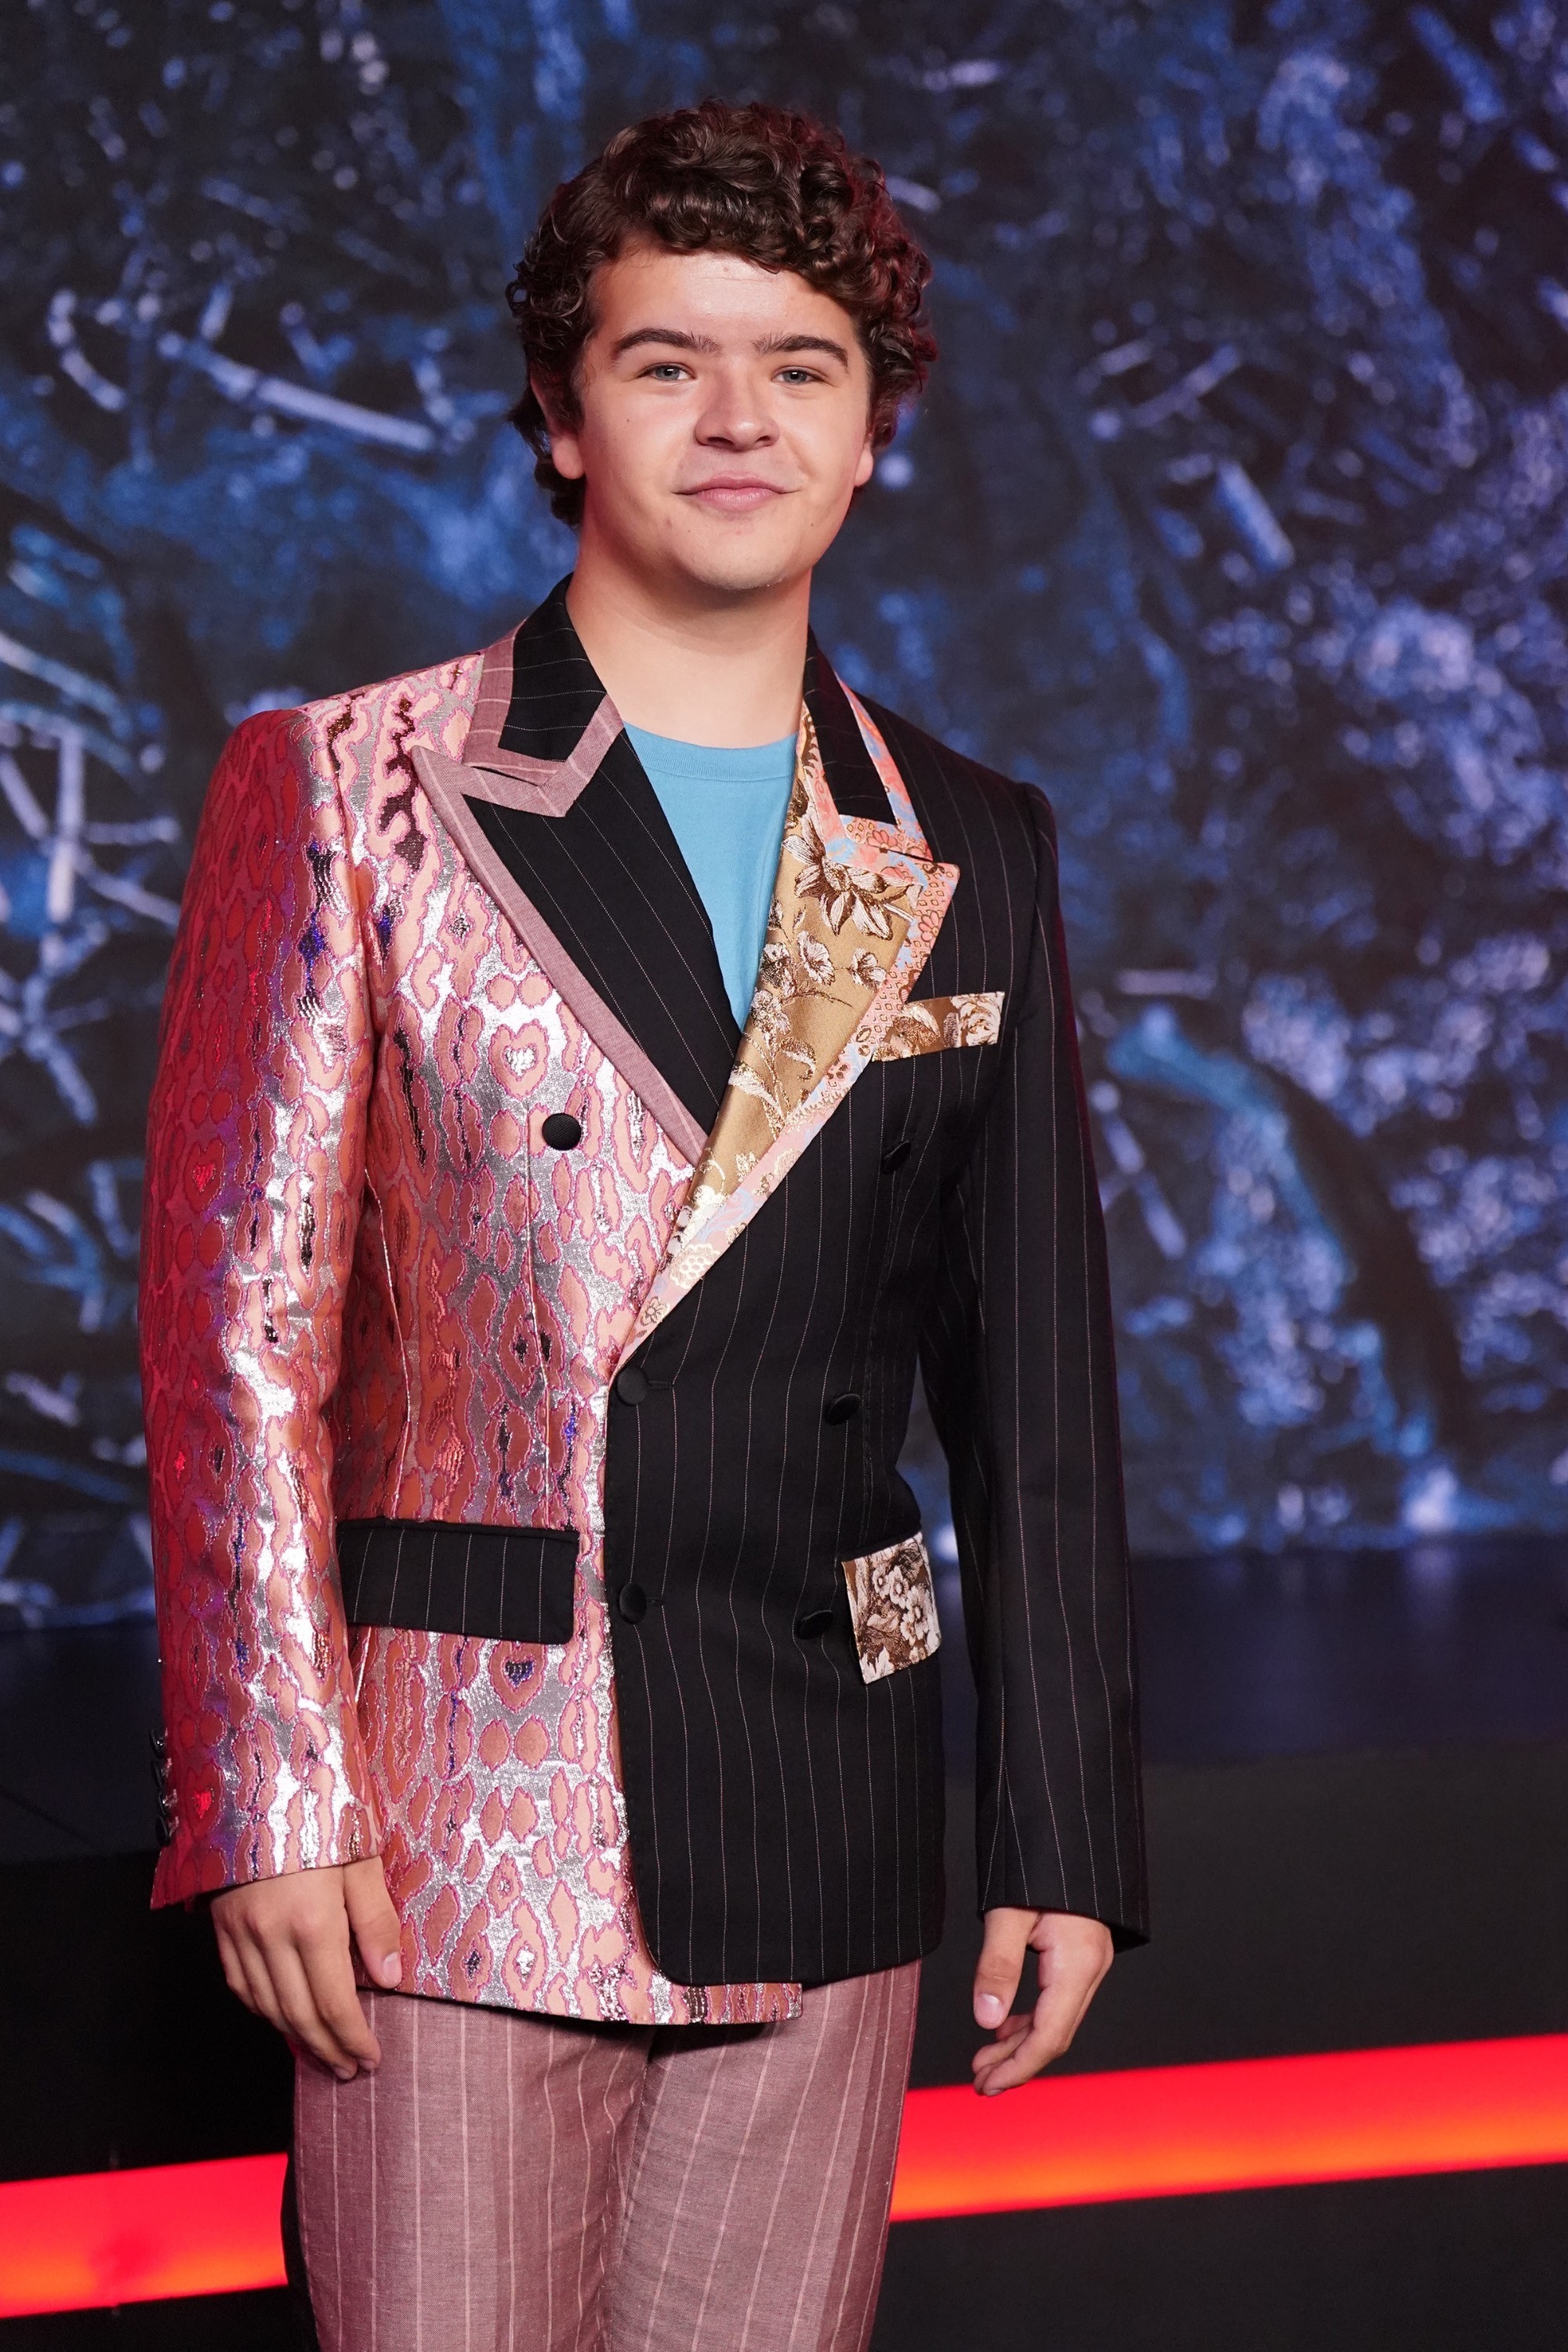 Gaten is wearing a multi-textured, multi-colored suit at a red carpet event